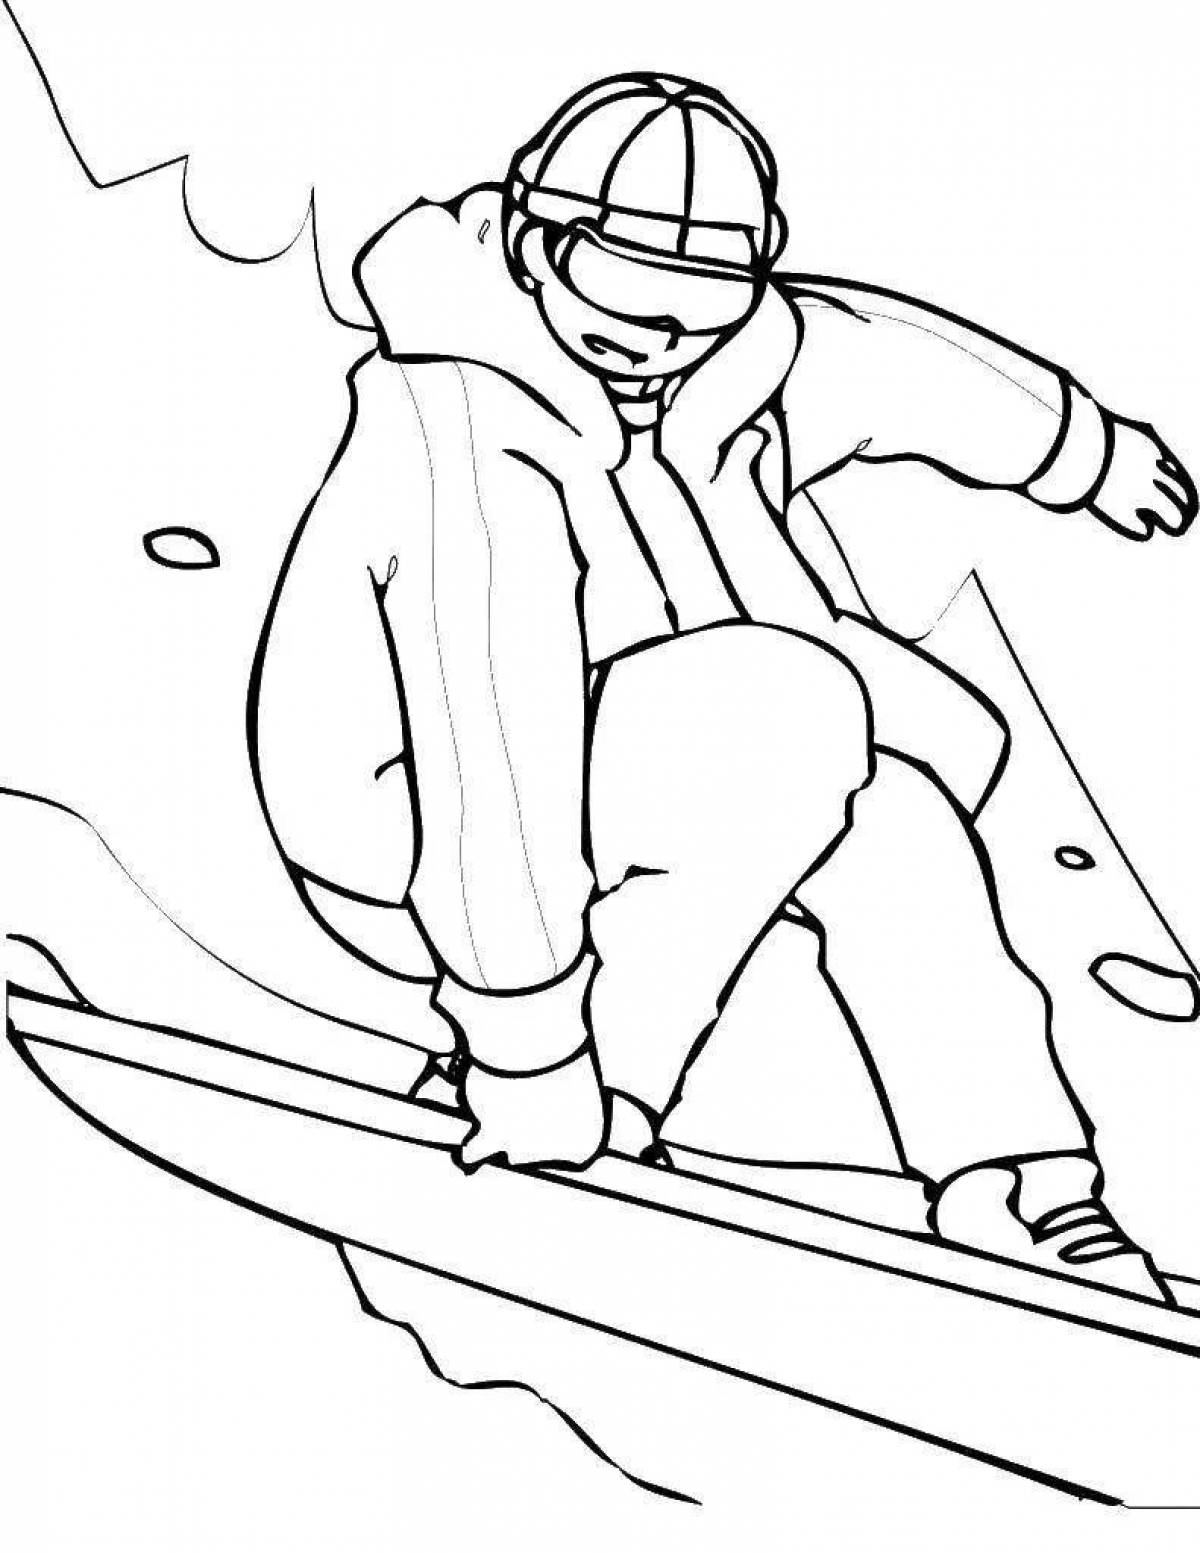 Courageous snowboarder coloring page